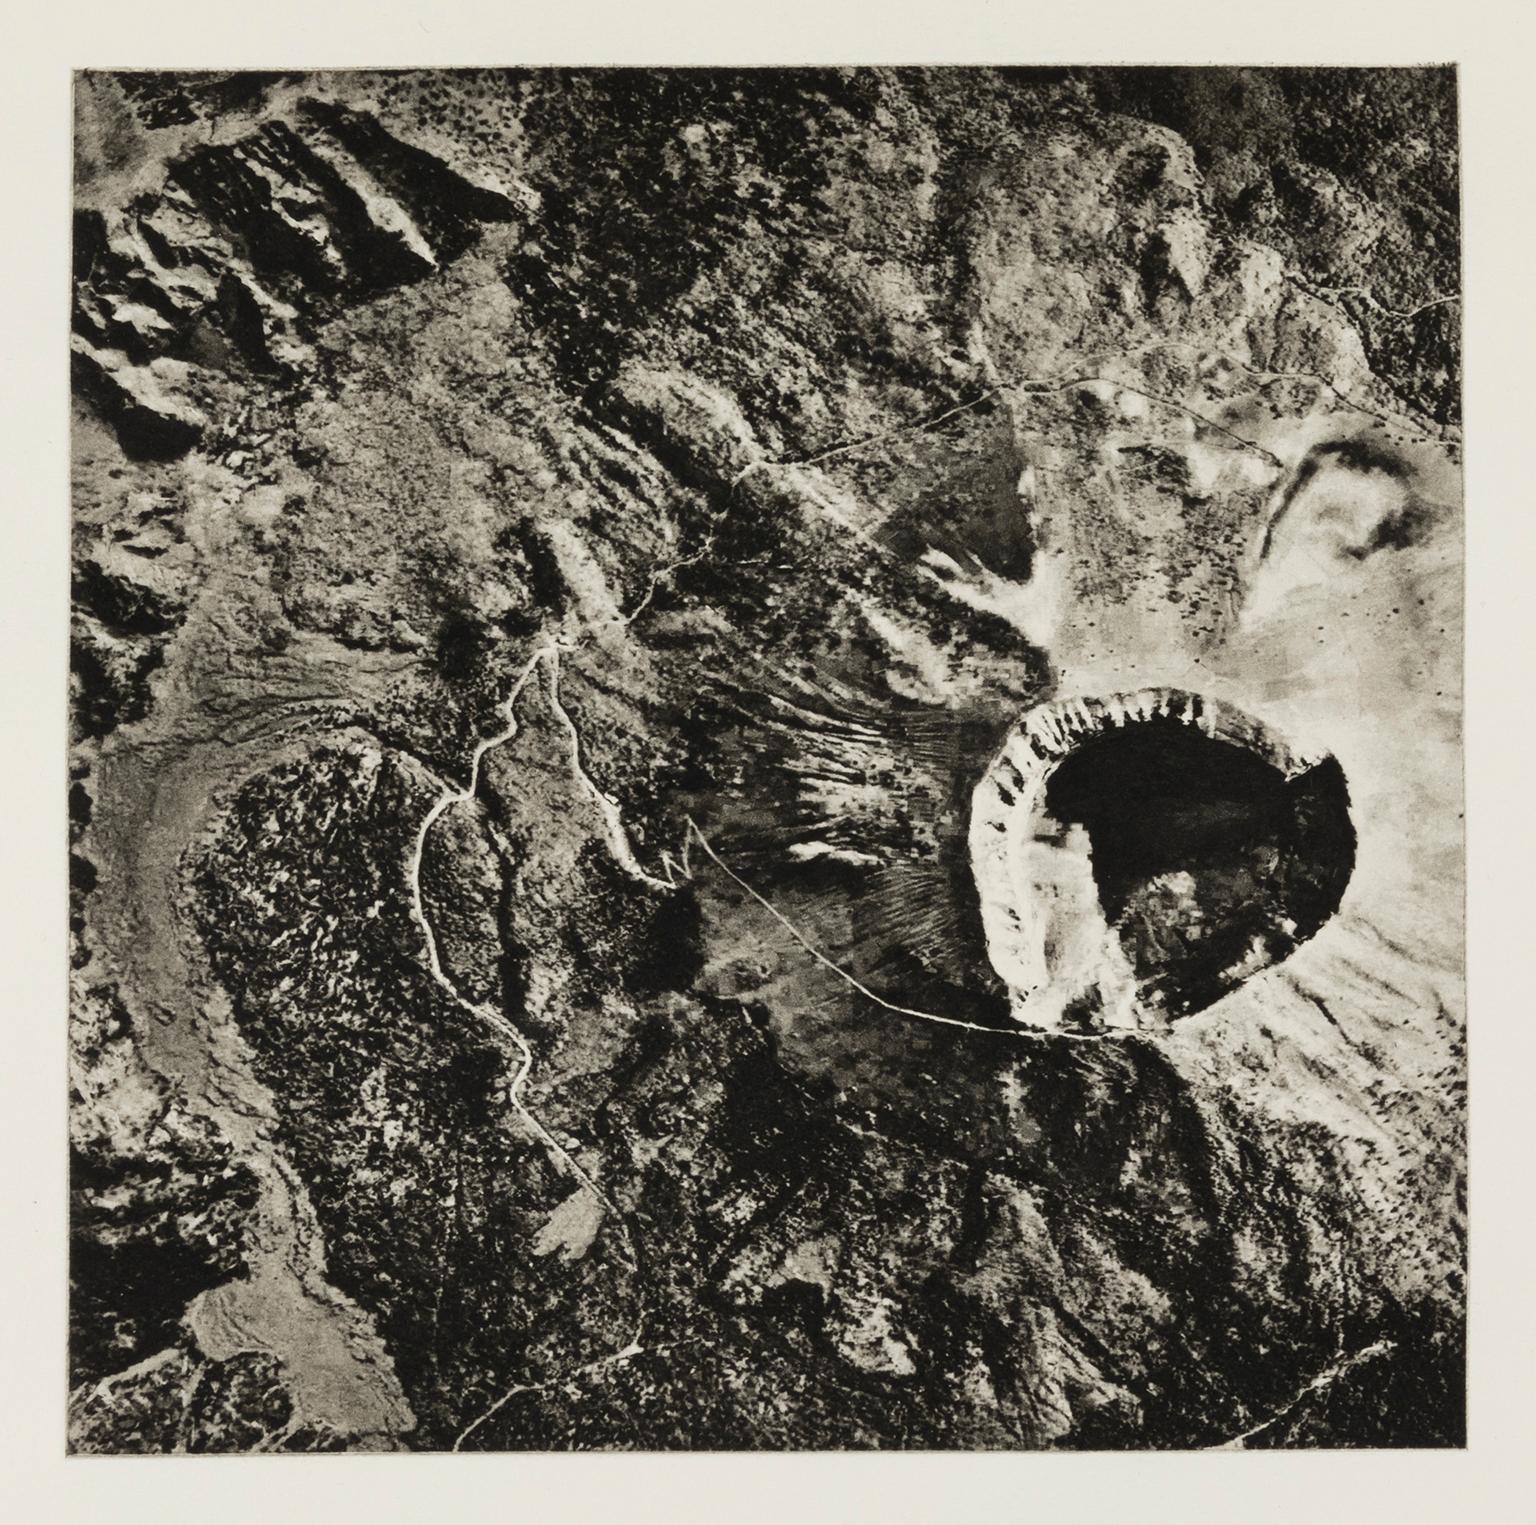 'Mount Vesuvius, Italy' — from the series 'Axis Mundi', Contemporary - Print by Beth Ganz